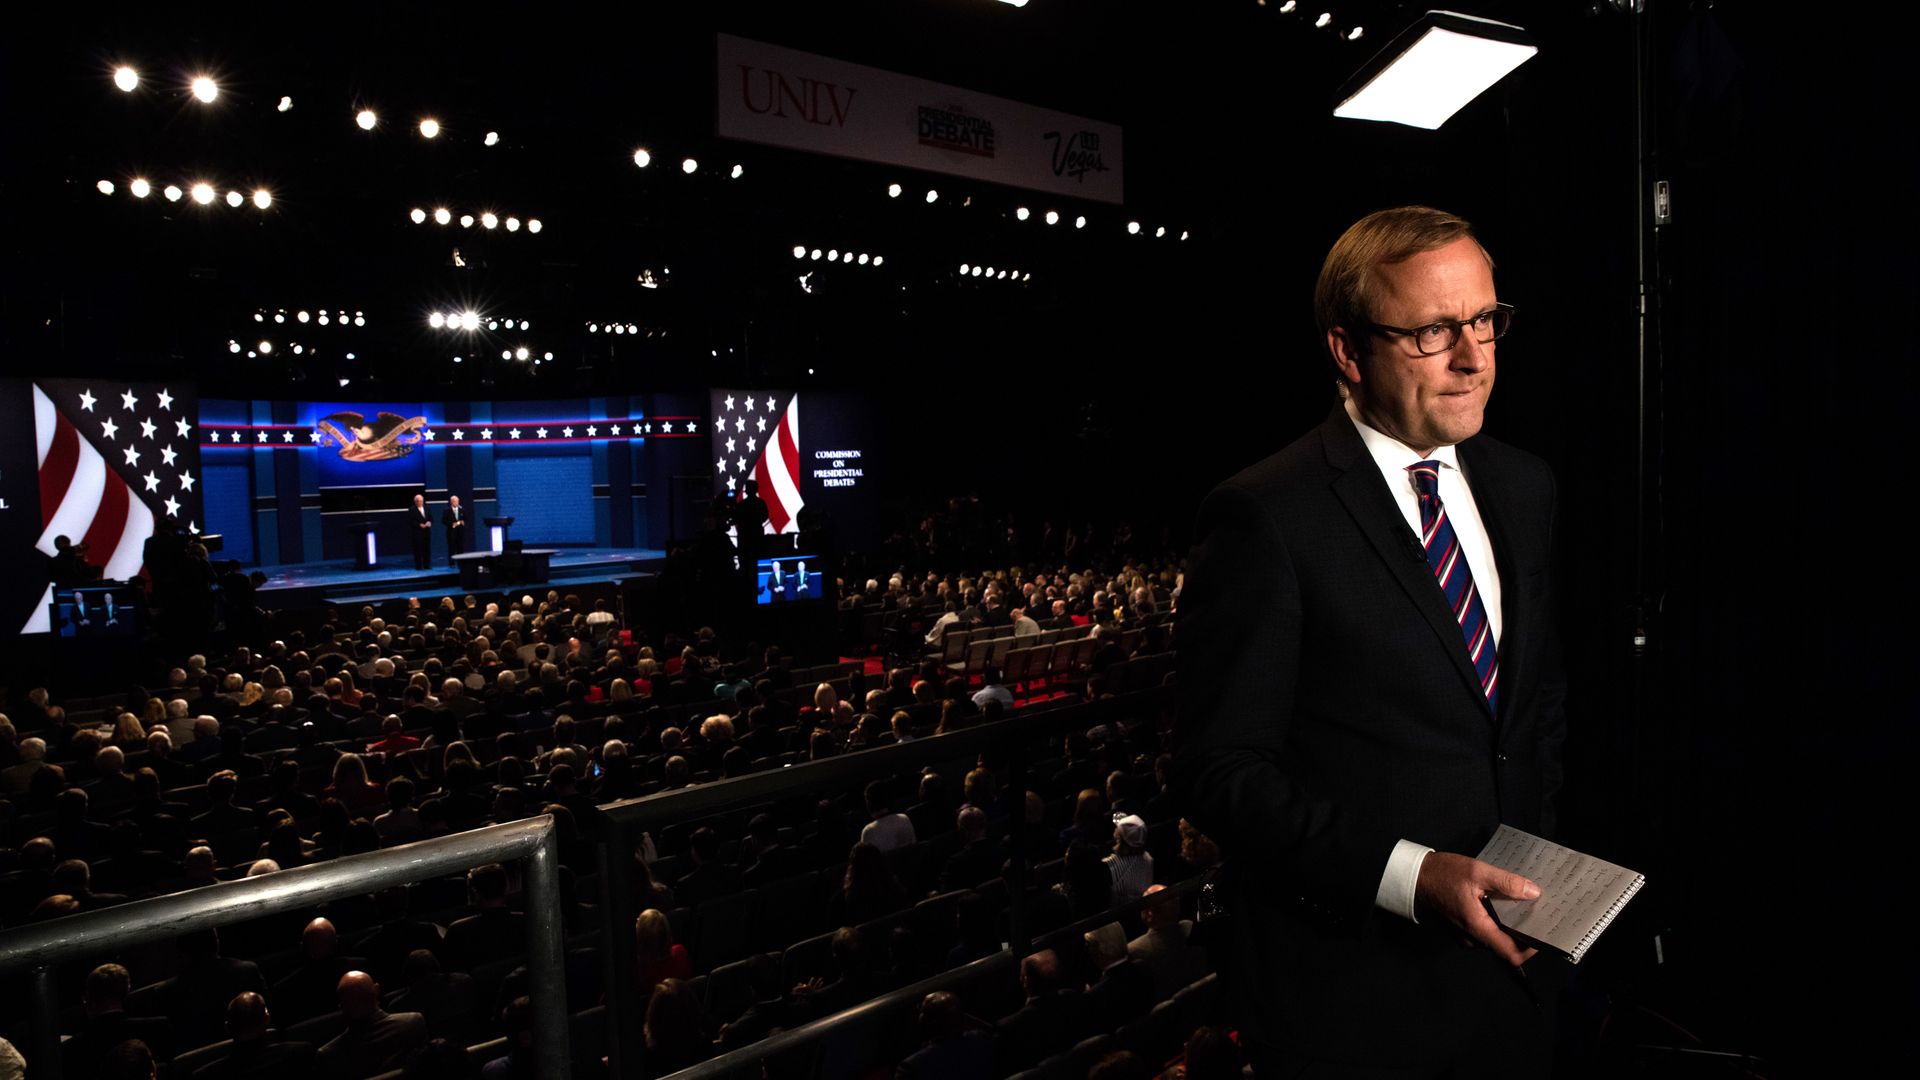 In this image, Jonathan Karl stands and holds a book with a debate stage and crowd behind him.